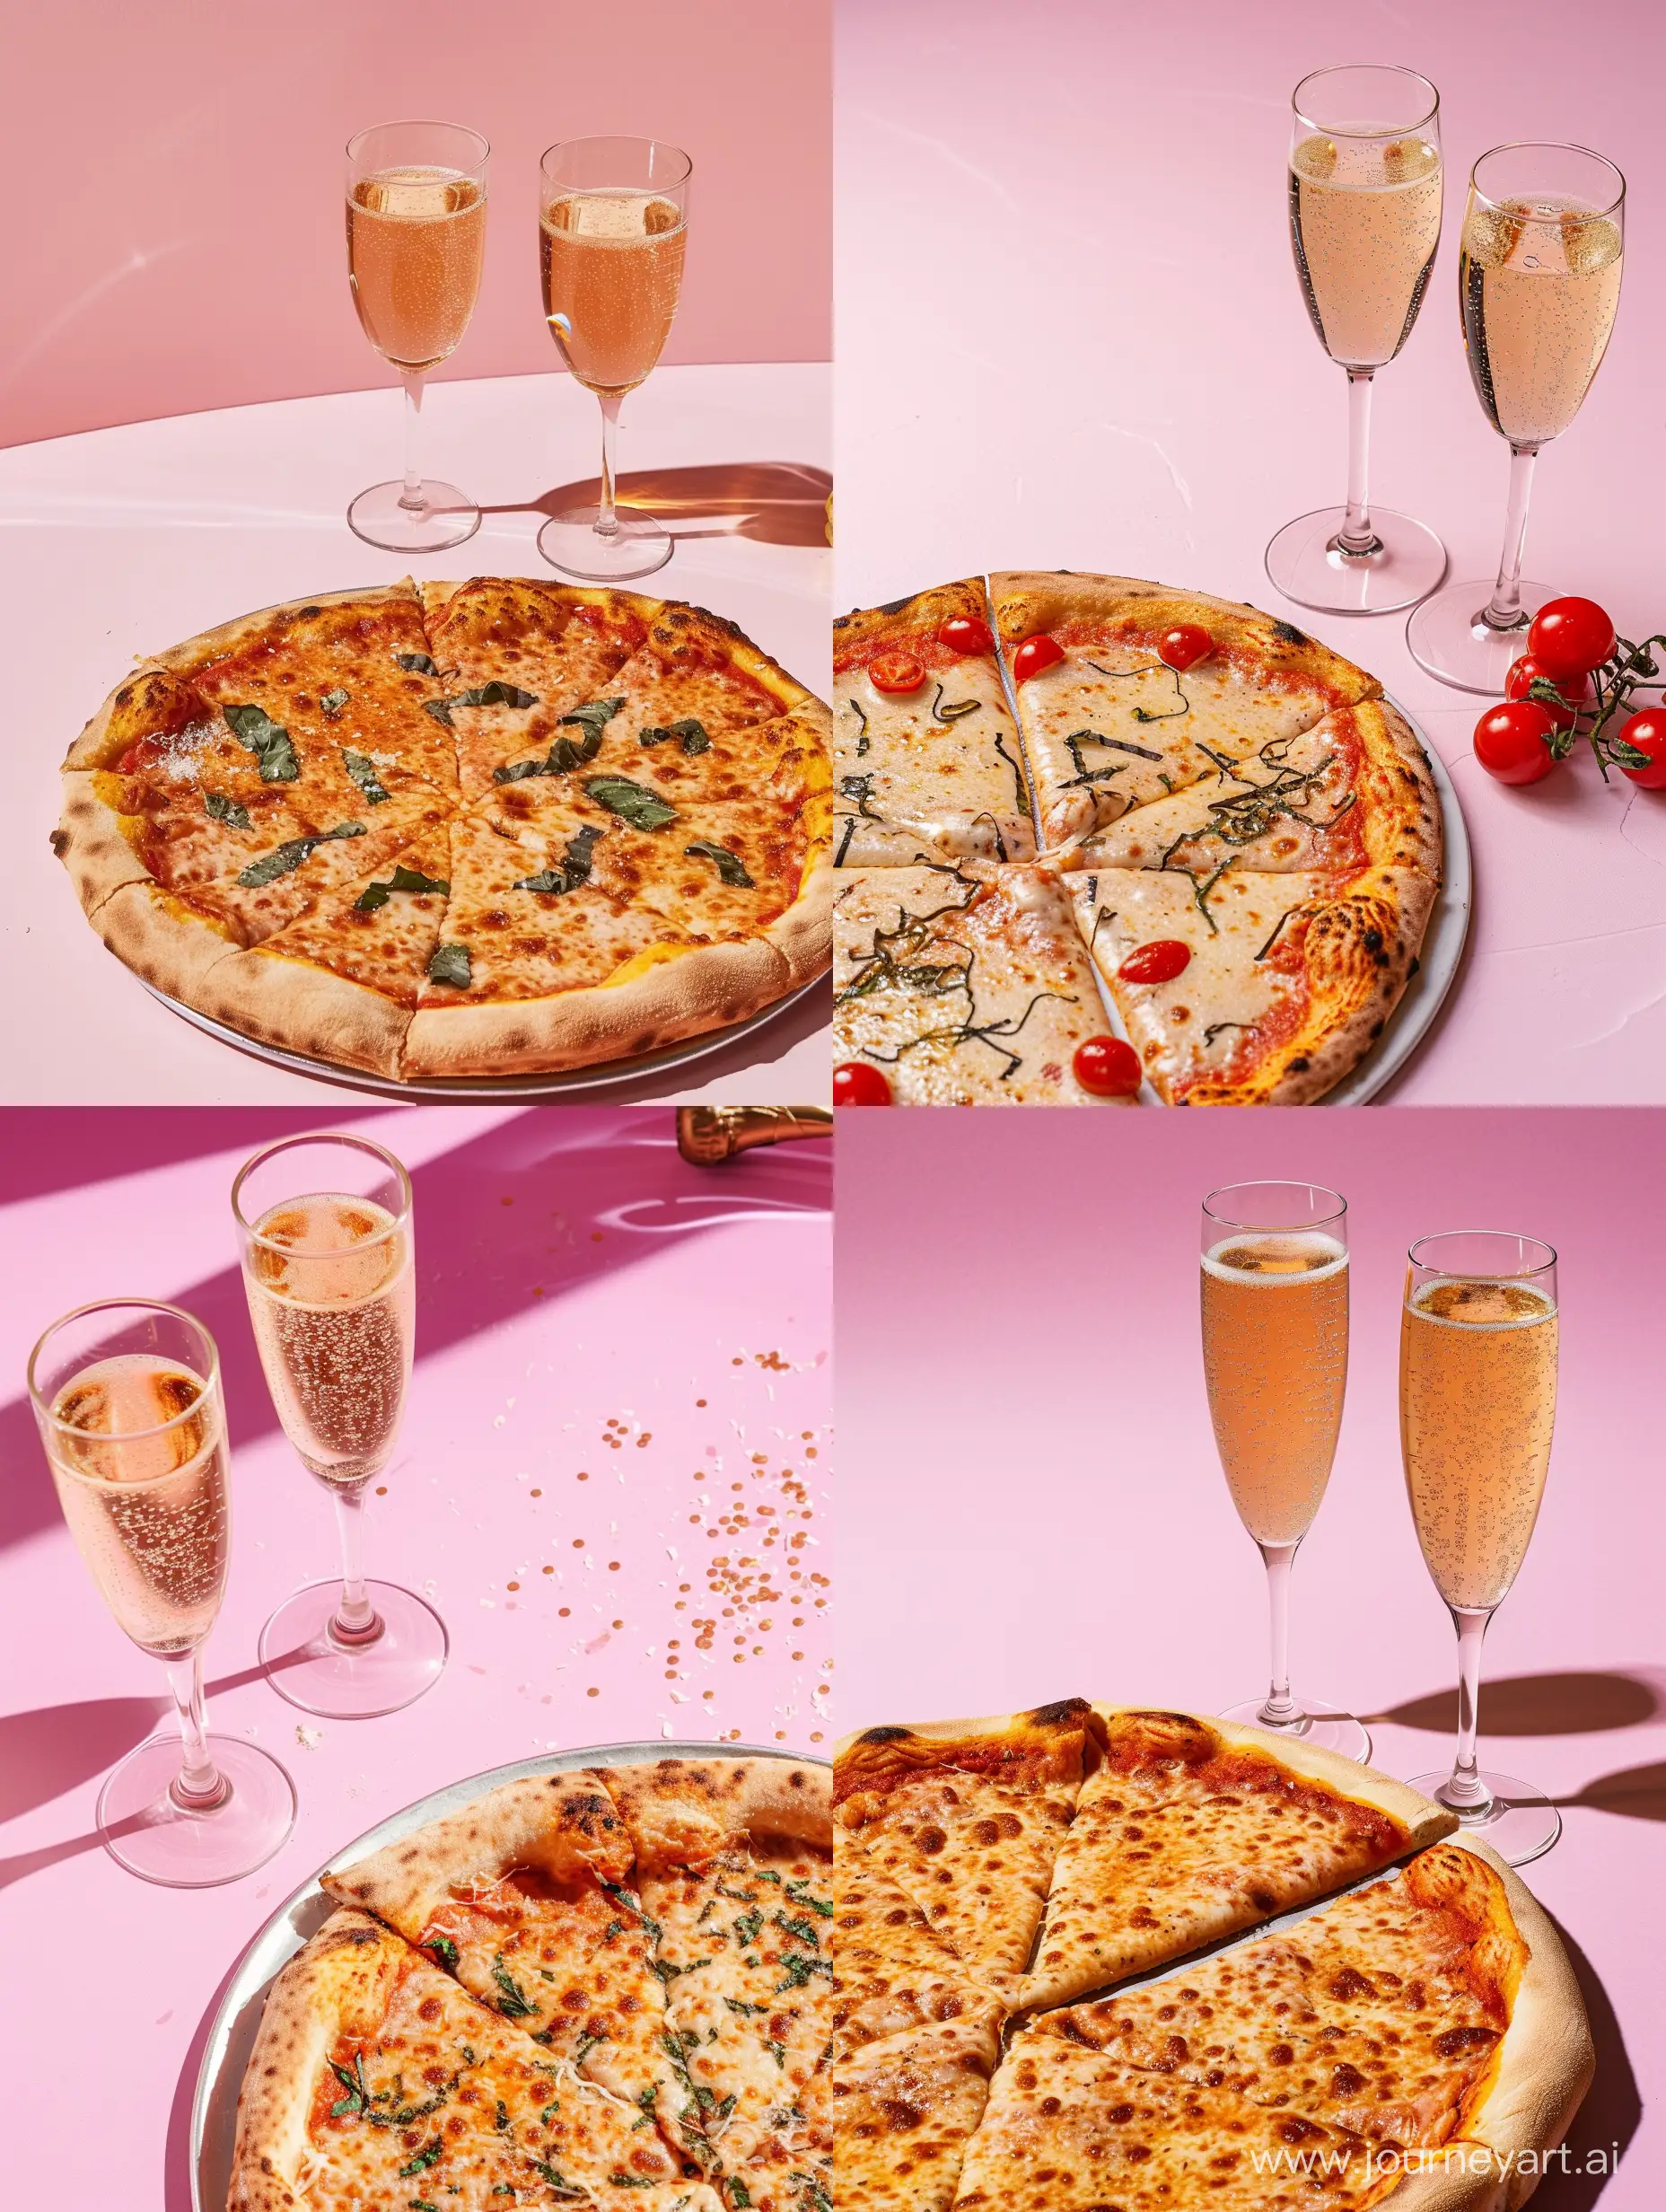 Gourmet-Roman-Pizza-and-Champagne-on-Pink-Background